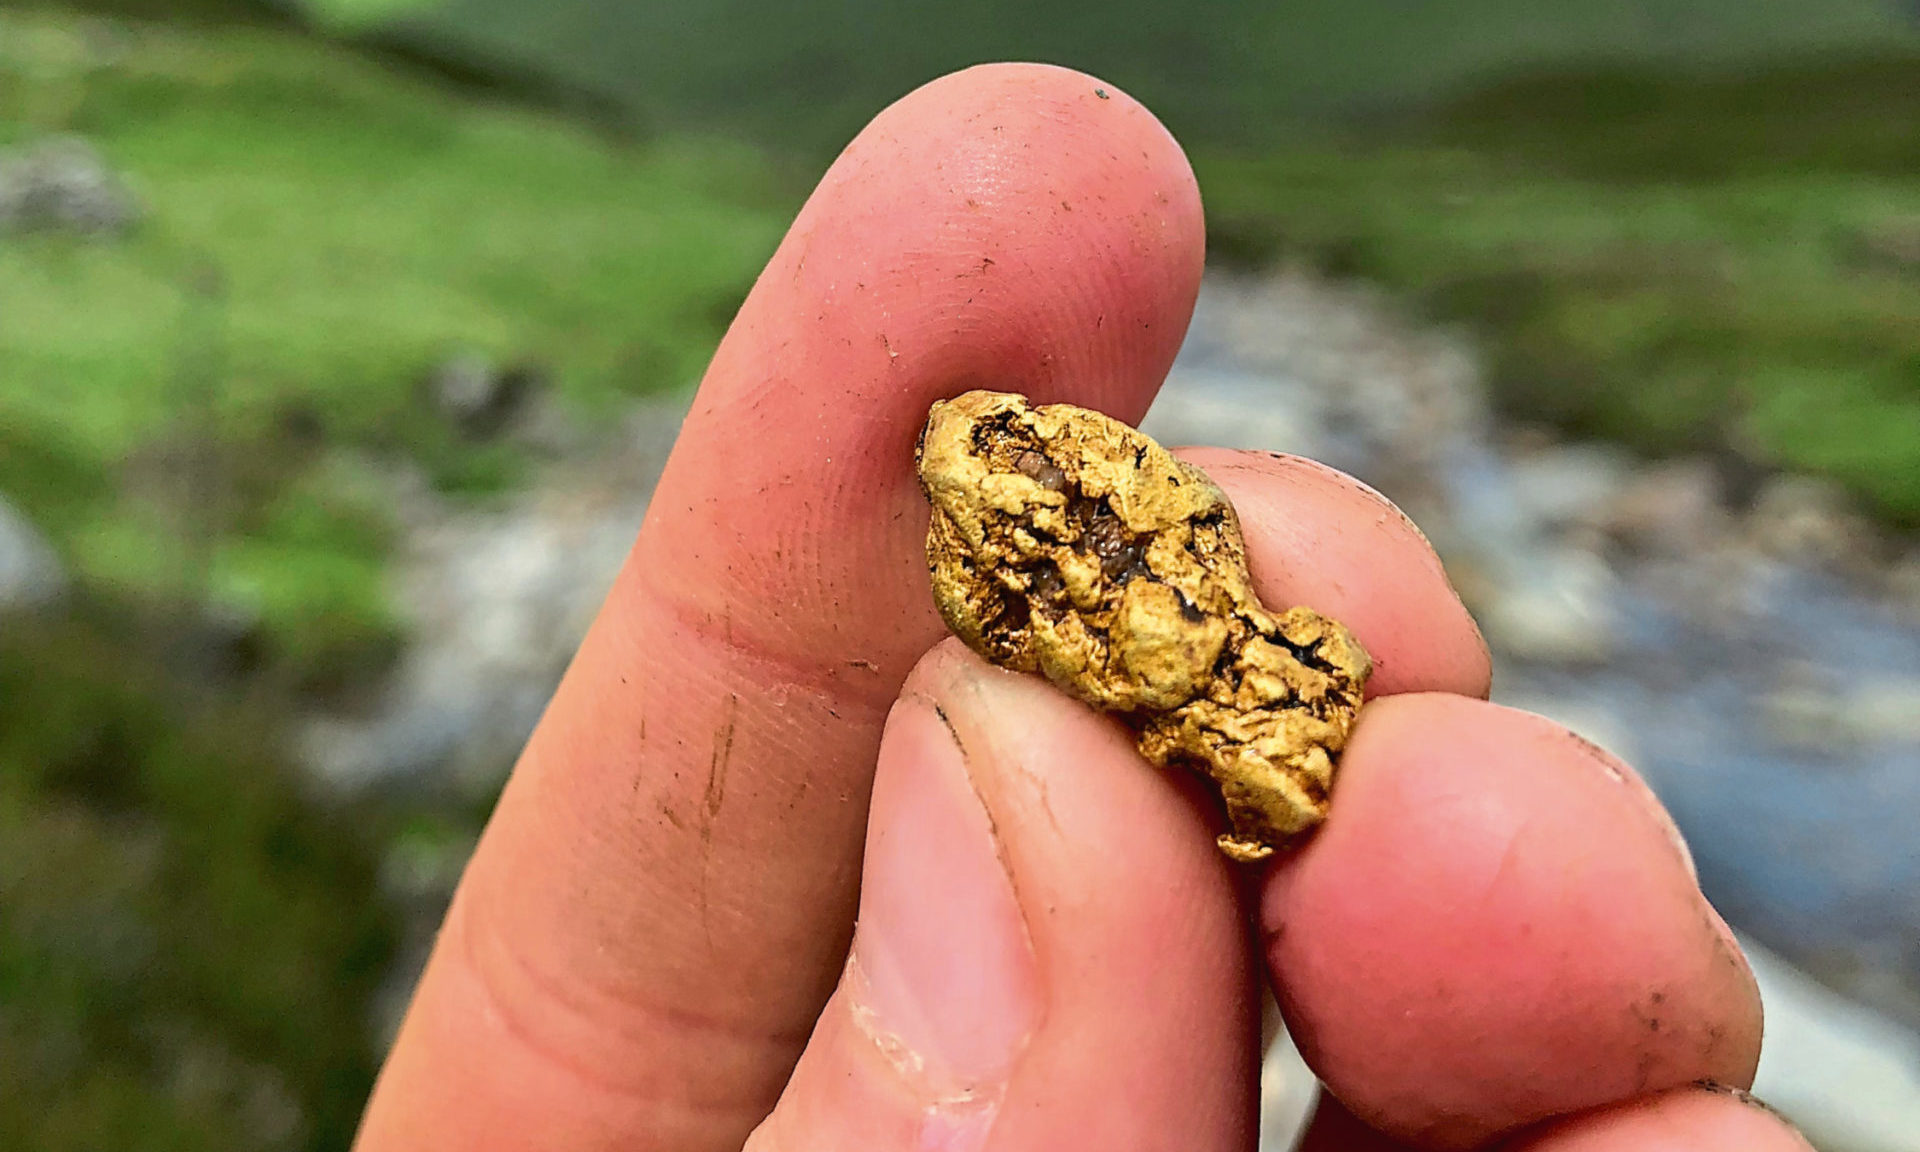 Erris Resources - the 10g gold nugget found in Perthshire in July